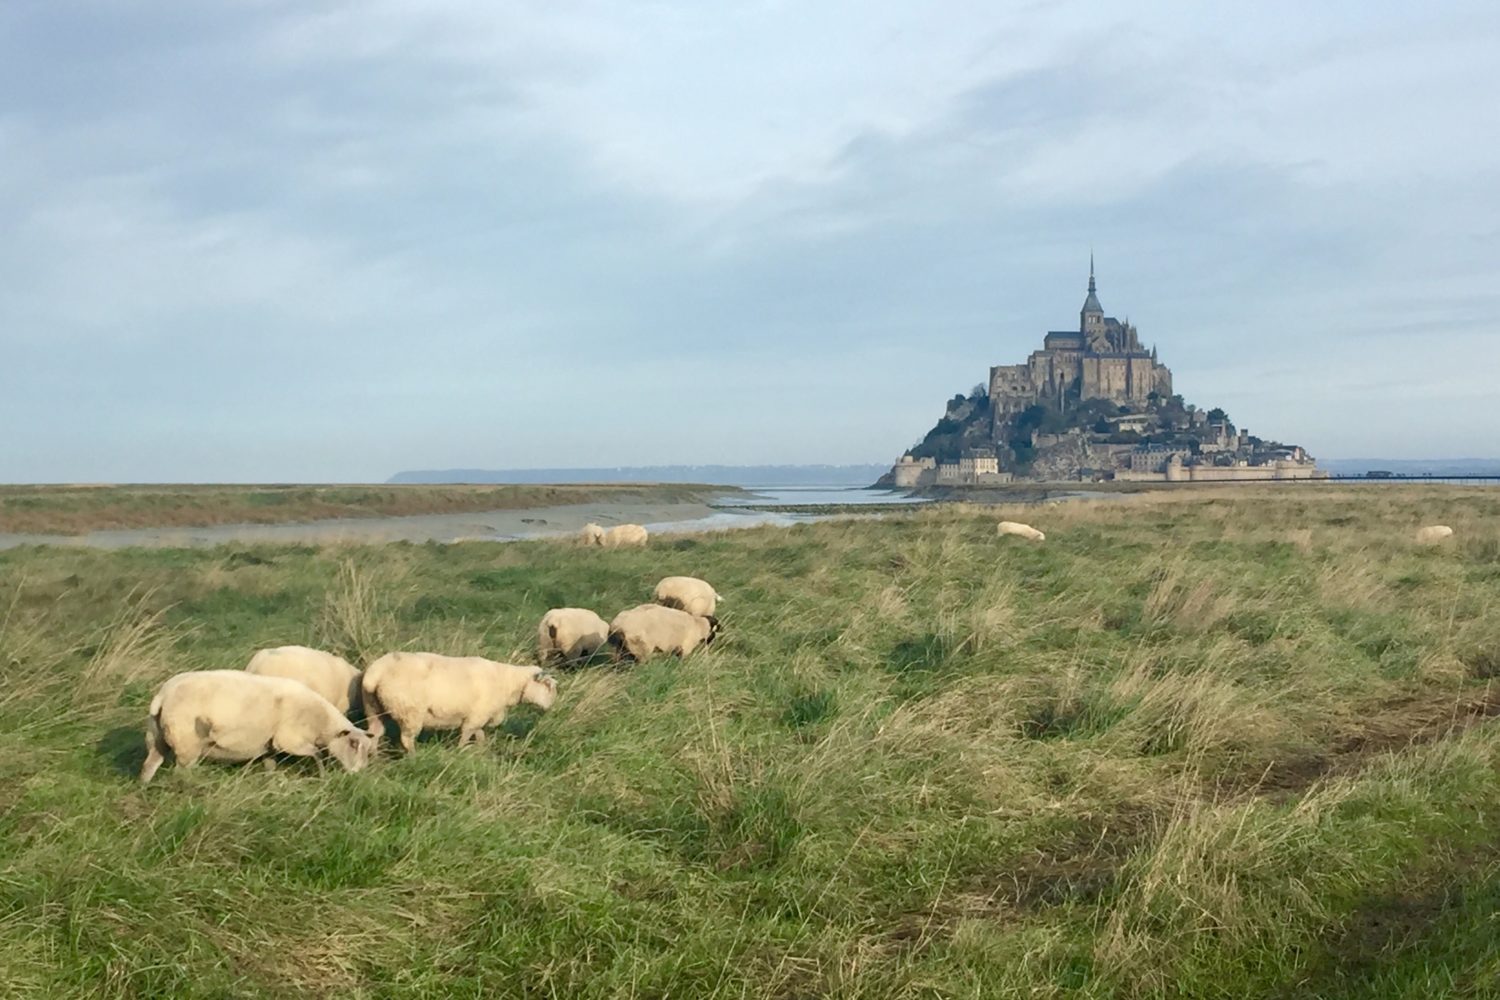 Self guided bike tour of Normandy visits Mont St Michel